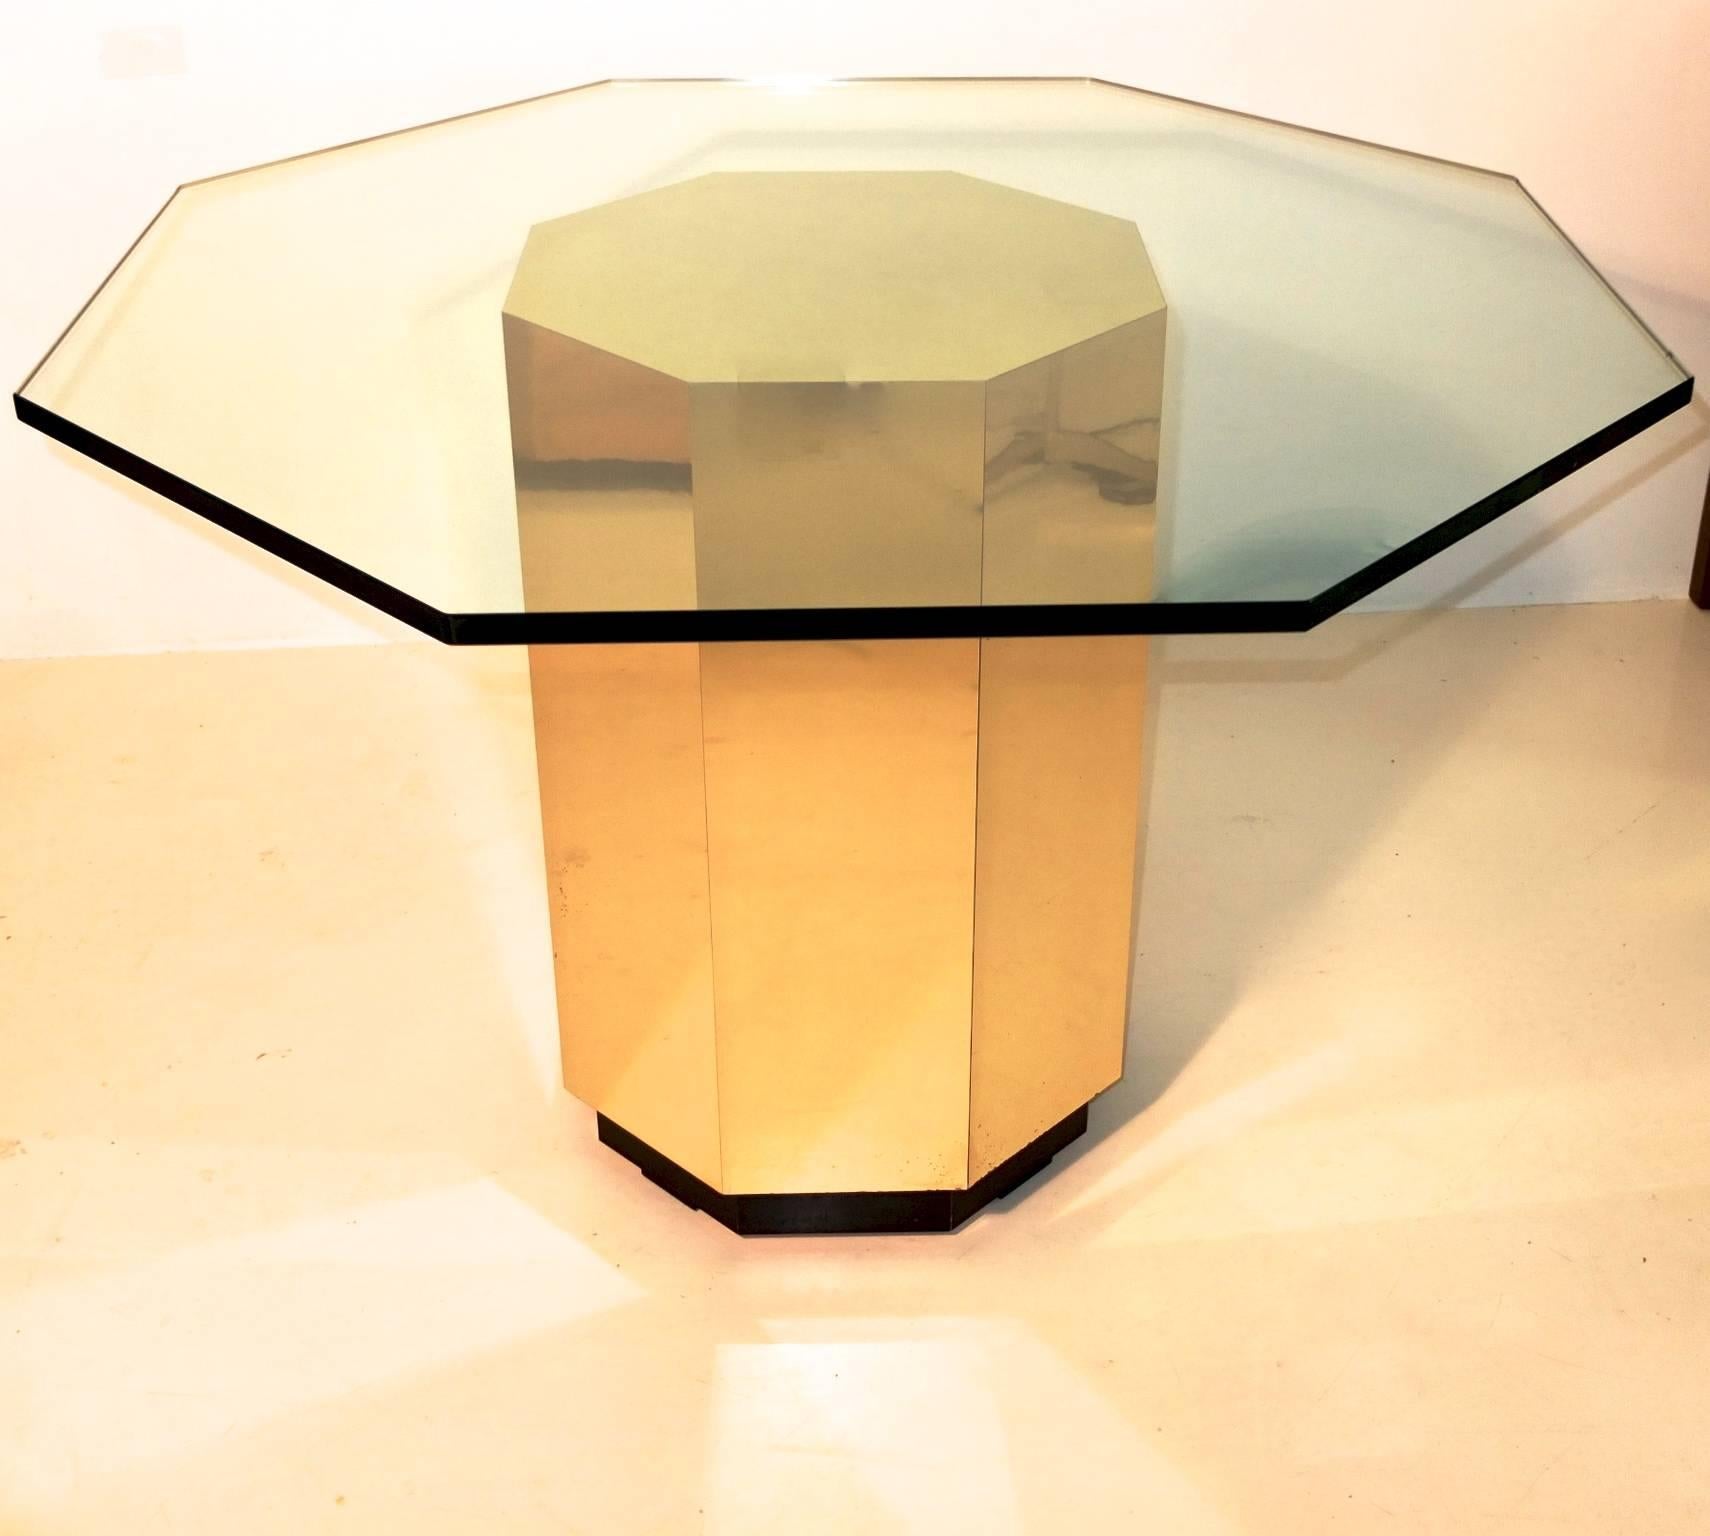 Mastercraft brass clad octagonal form pedestal drum dining table base with ebonized recessed wood plinth and brass top. Measures: 18